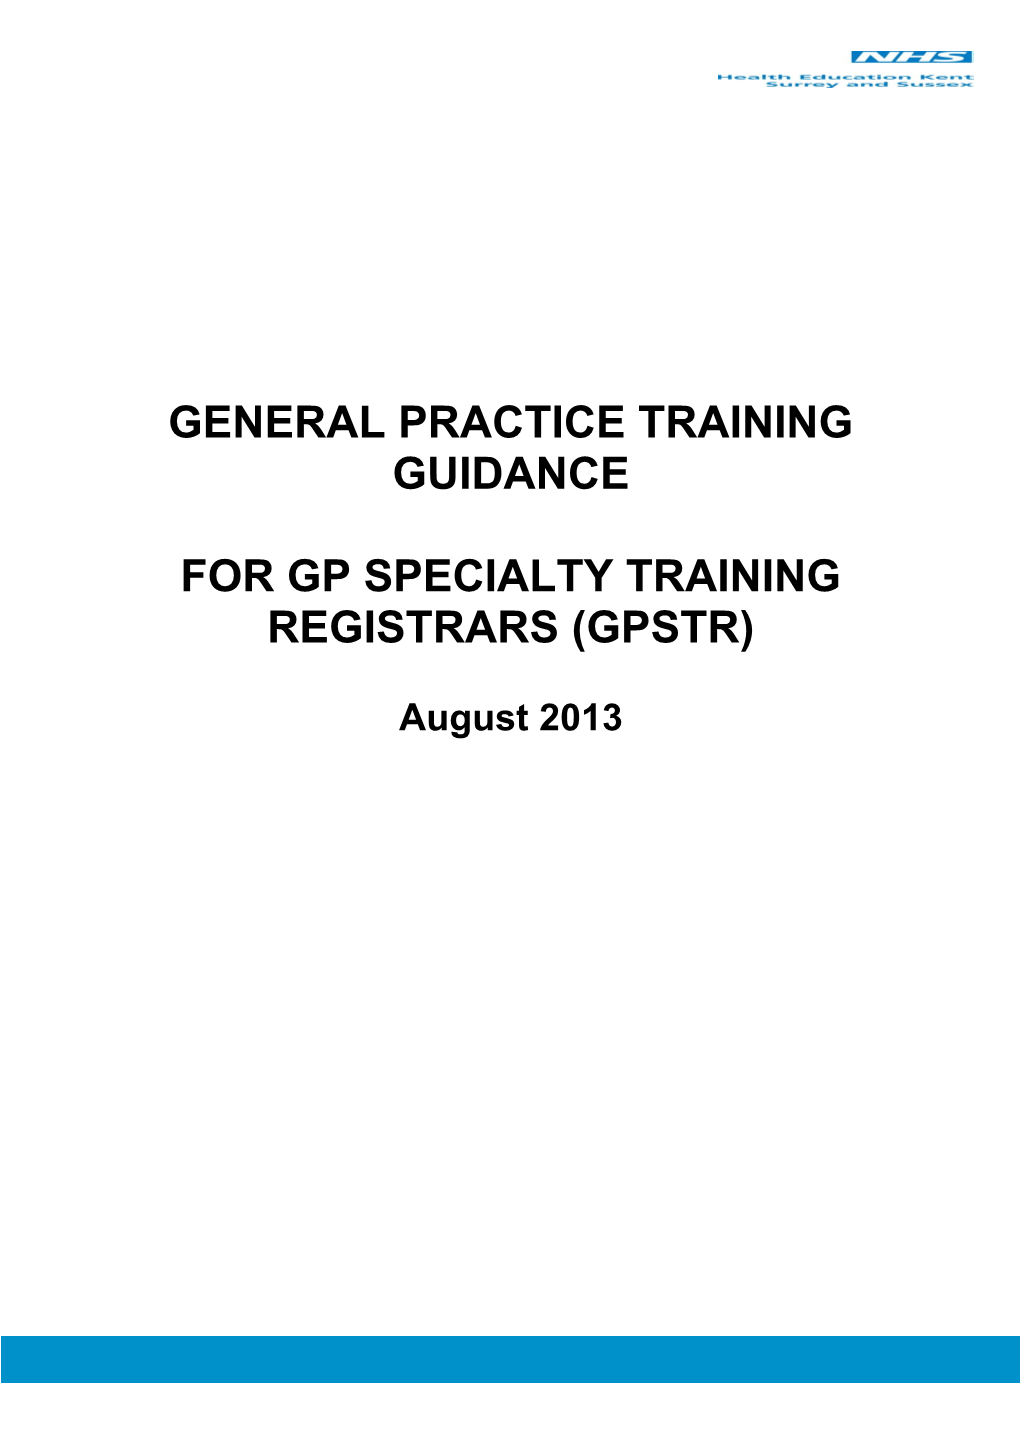 General Practice Training Guidance